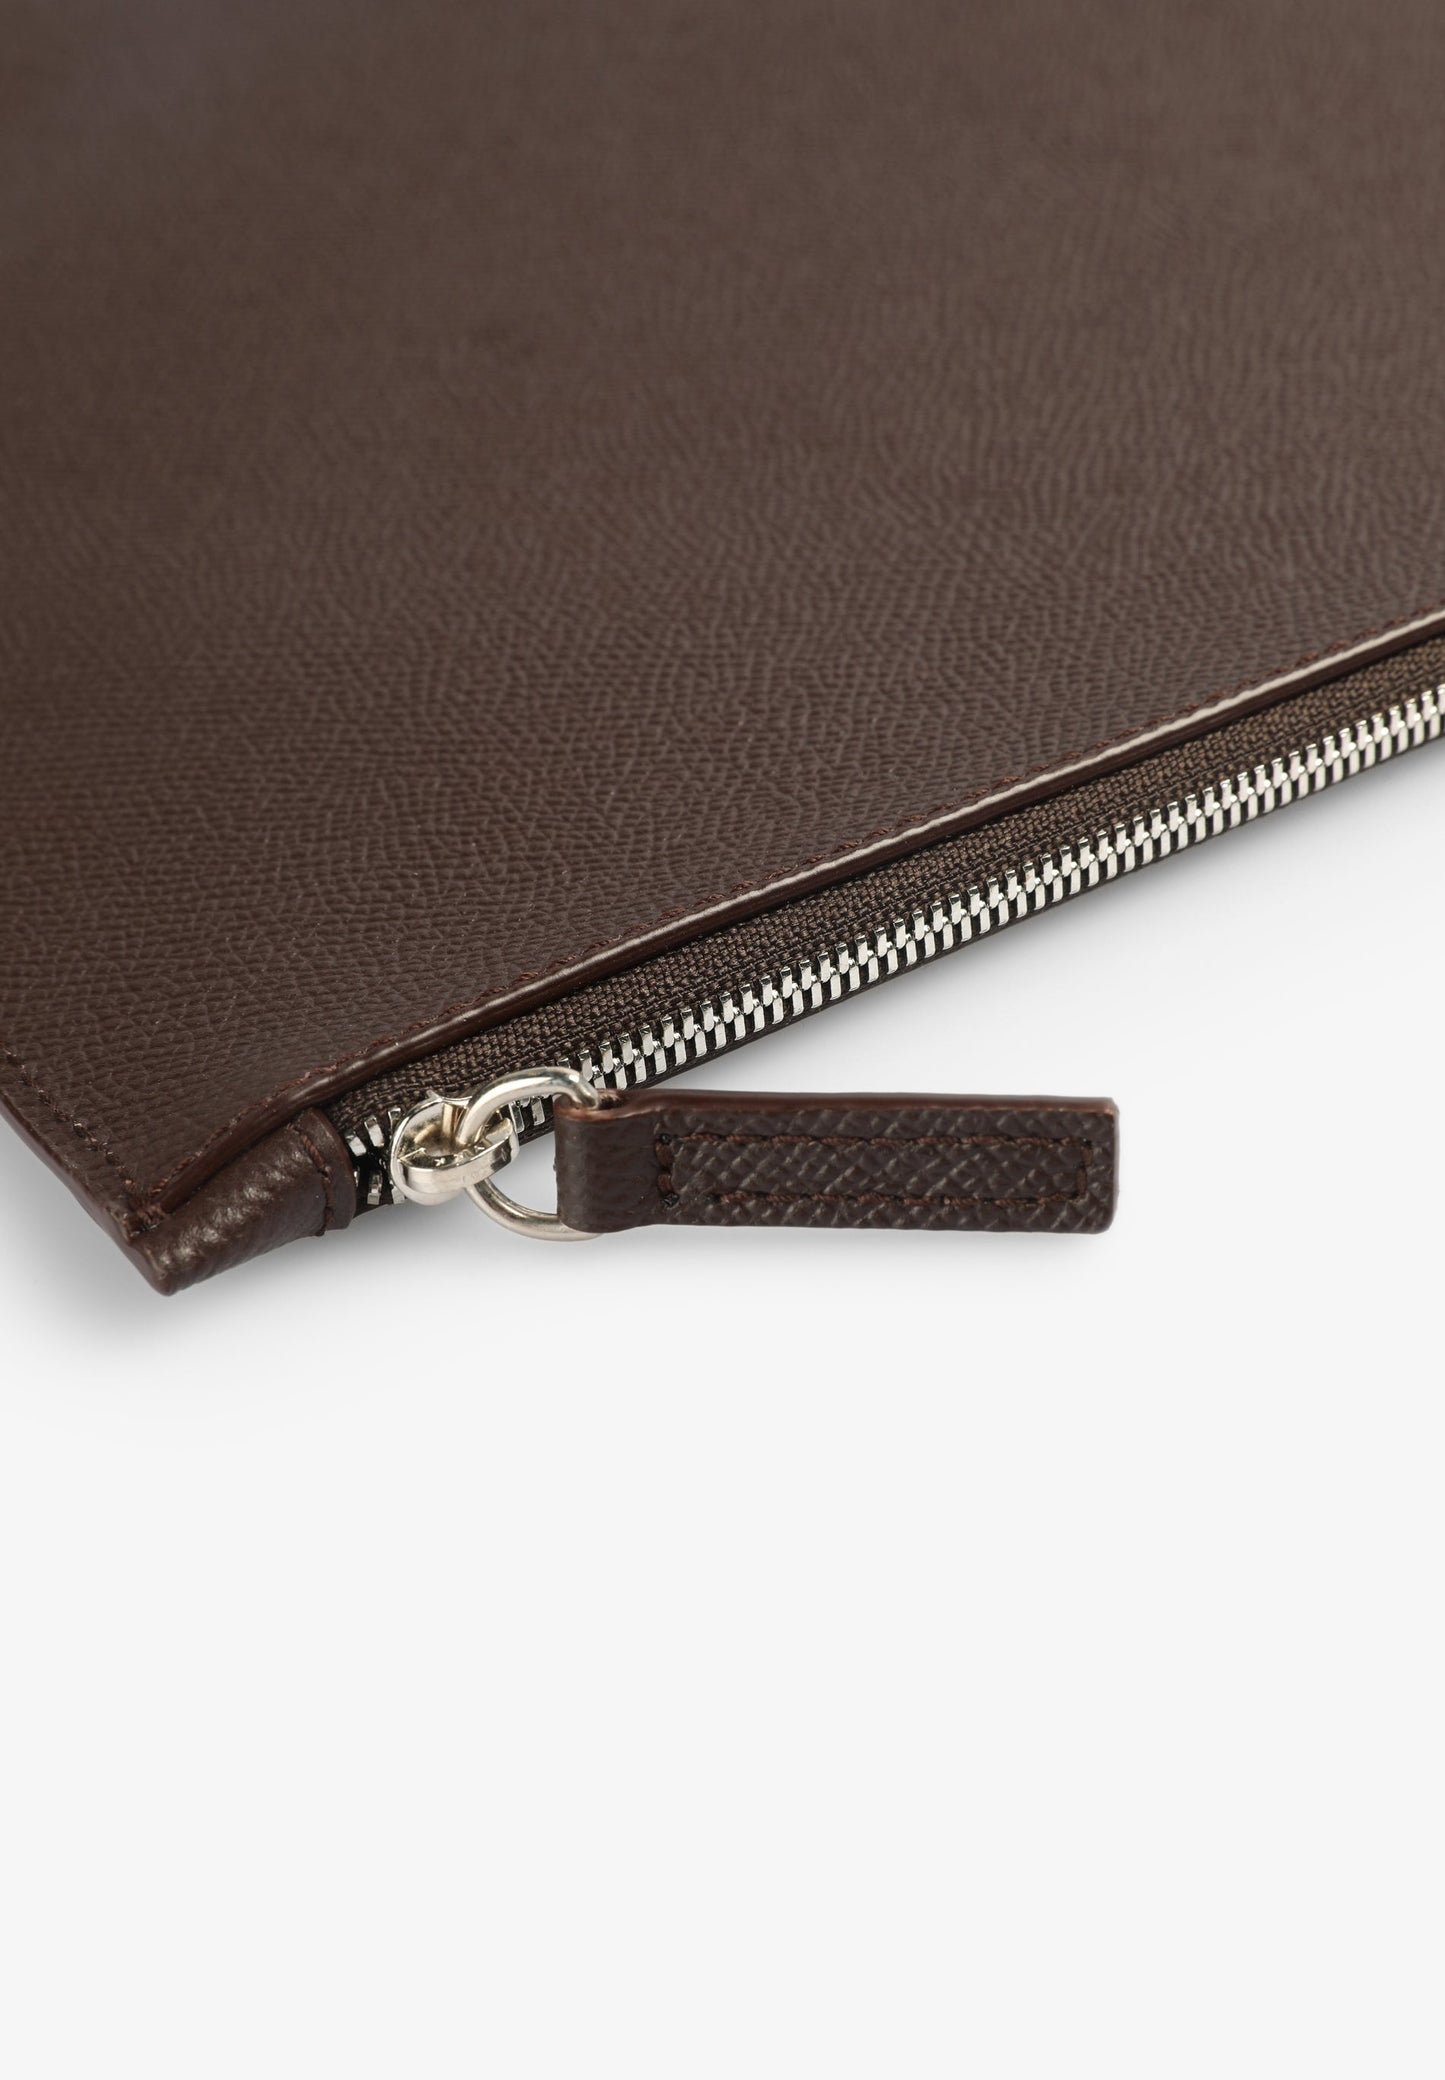 LEATHER DOCUMENT CASE